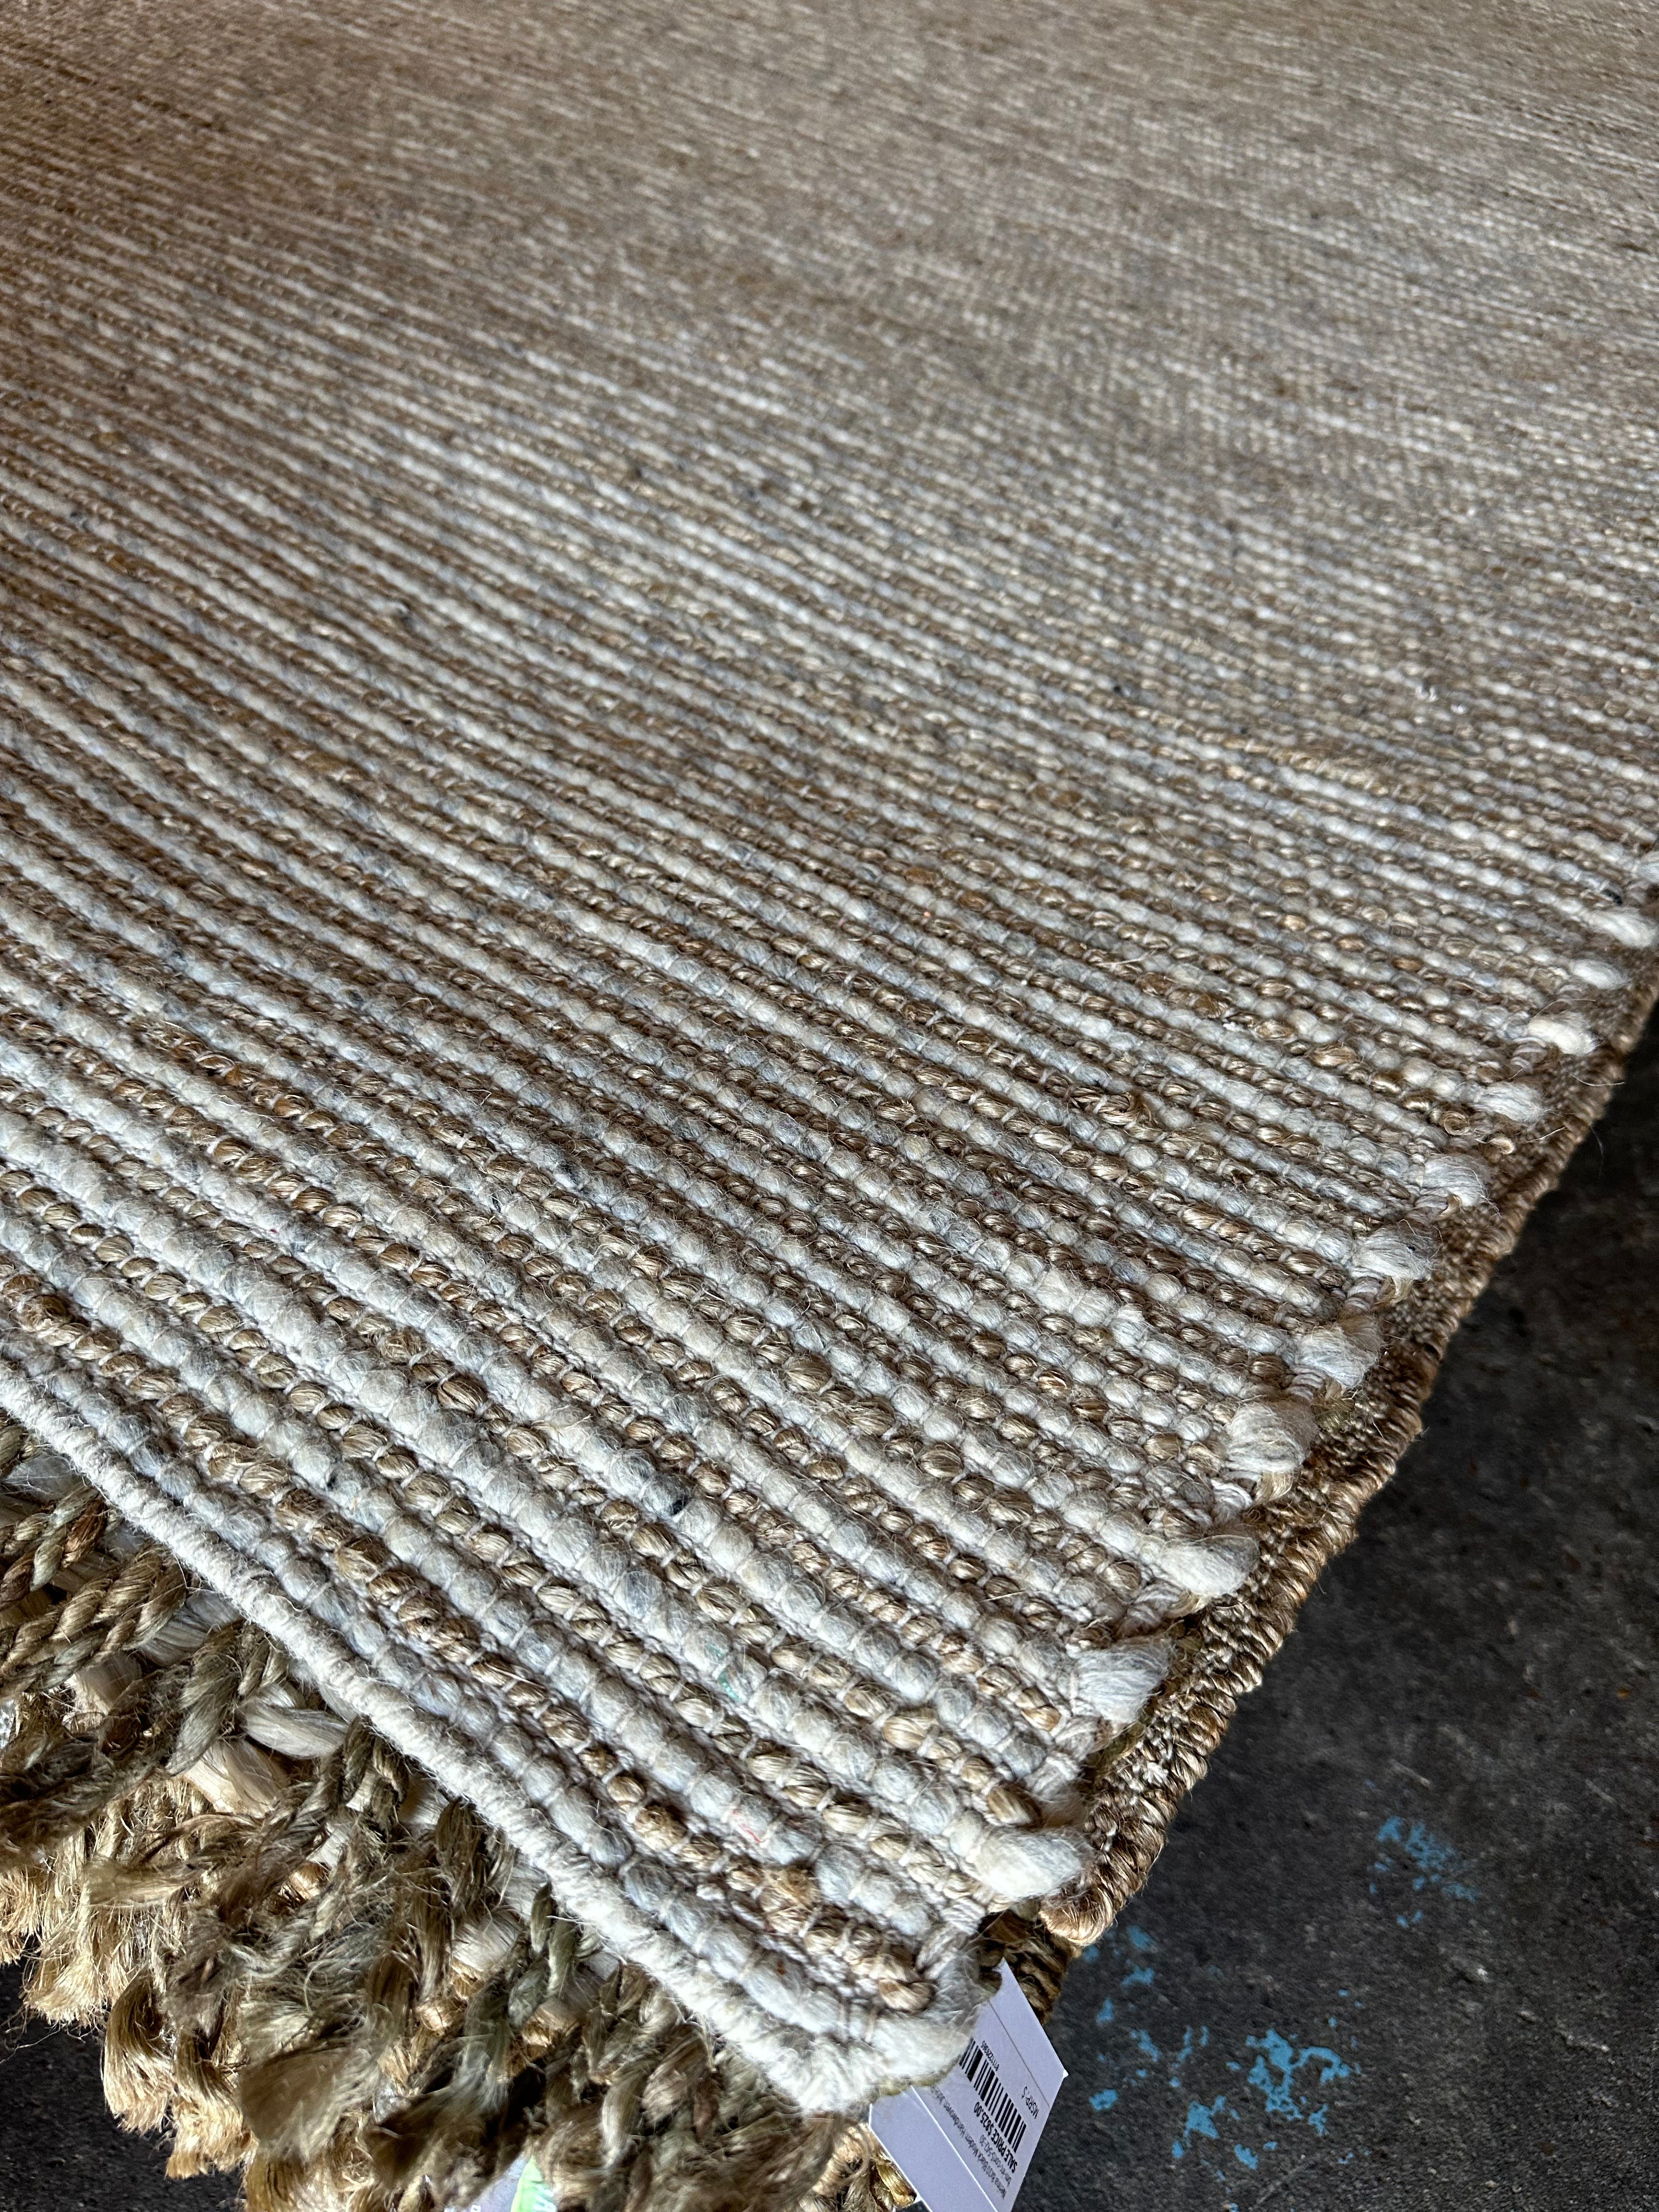 Hulka Handwoven 8.3x10.3 White and Natural Striped Jute & Wool Rug CLEARANCE